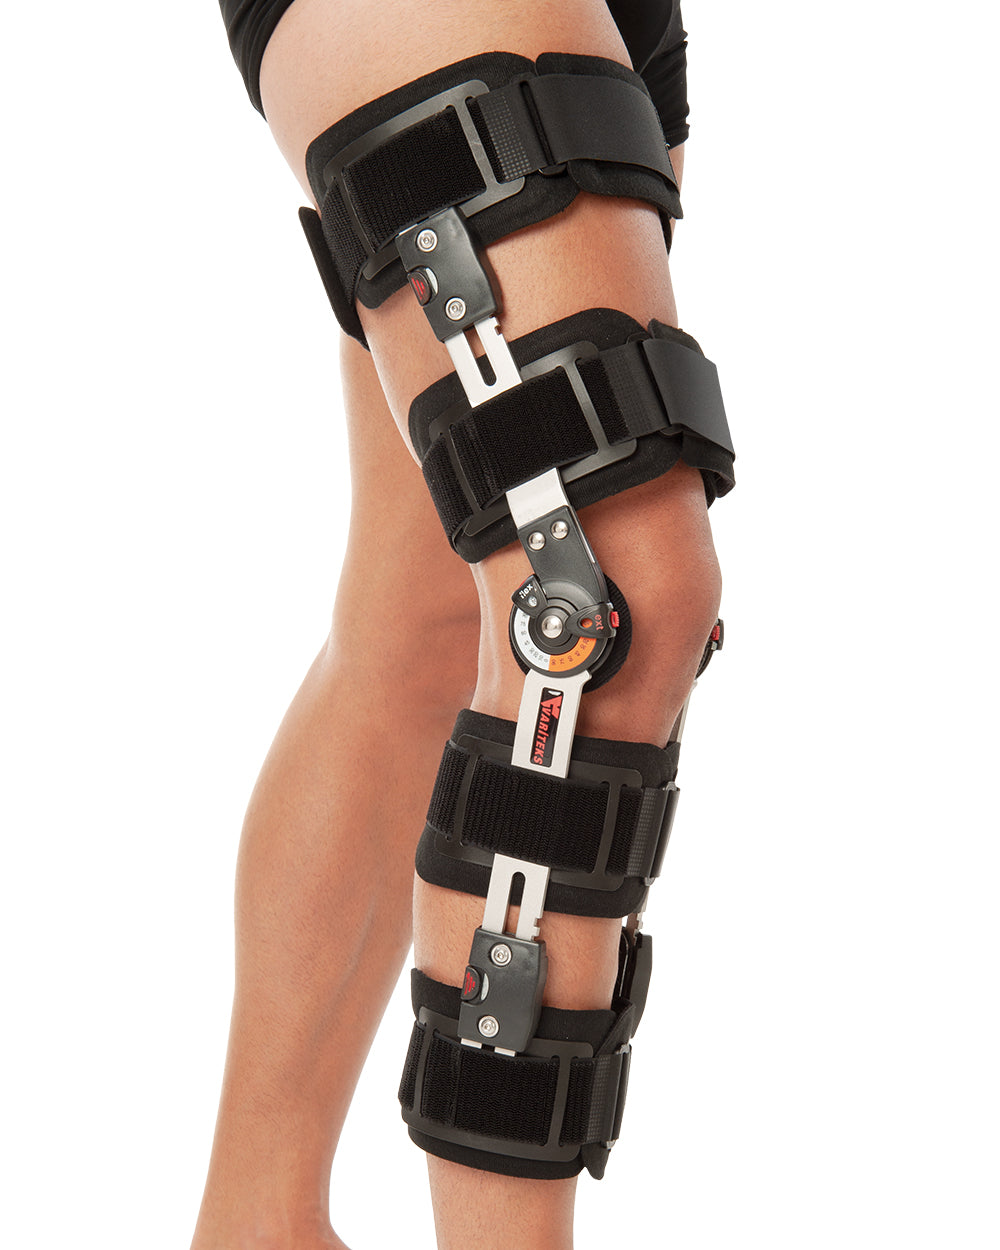 Hinged Stabilizing Knee Brace (Universal Size) – Total Care